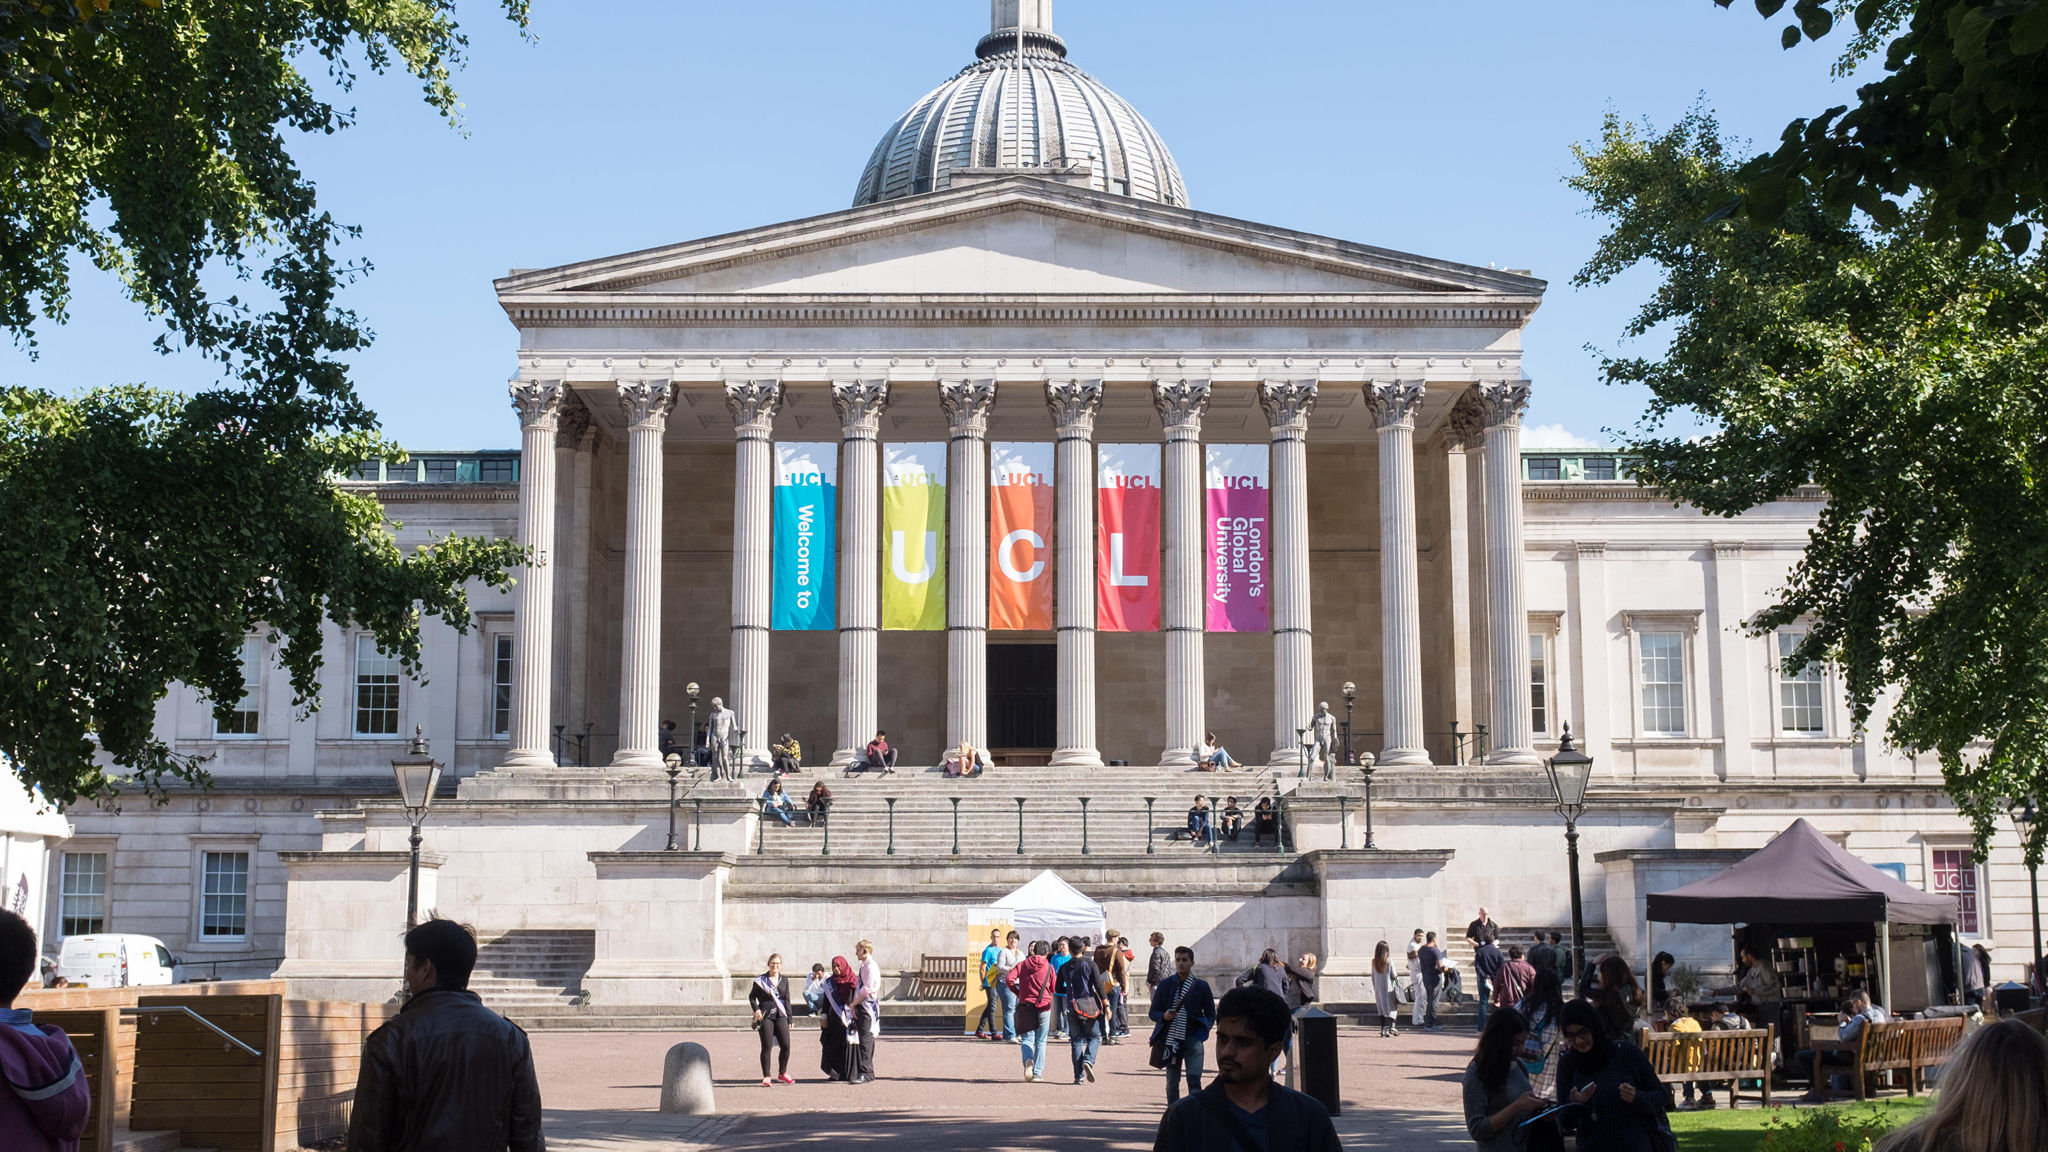 UCL considers funding options to help EU students Financial Times 2048x1152